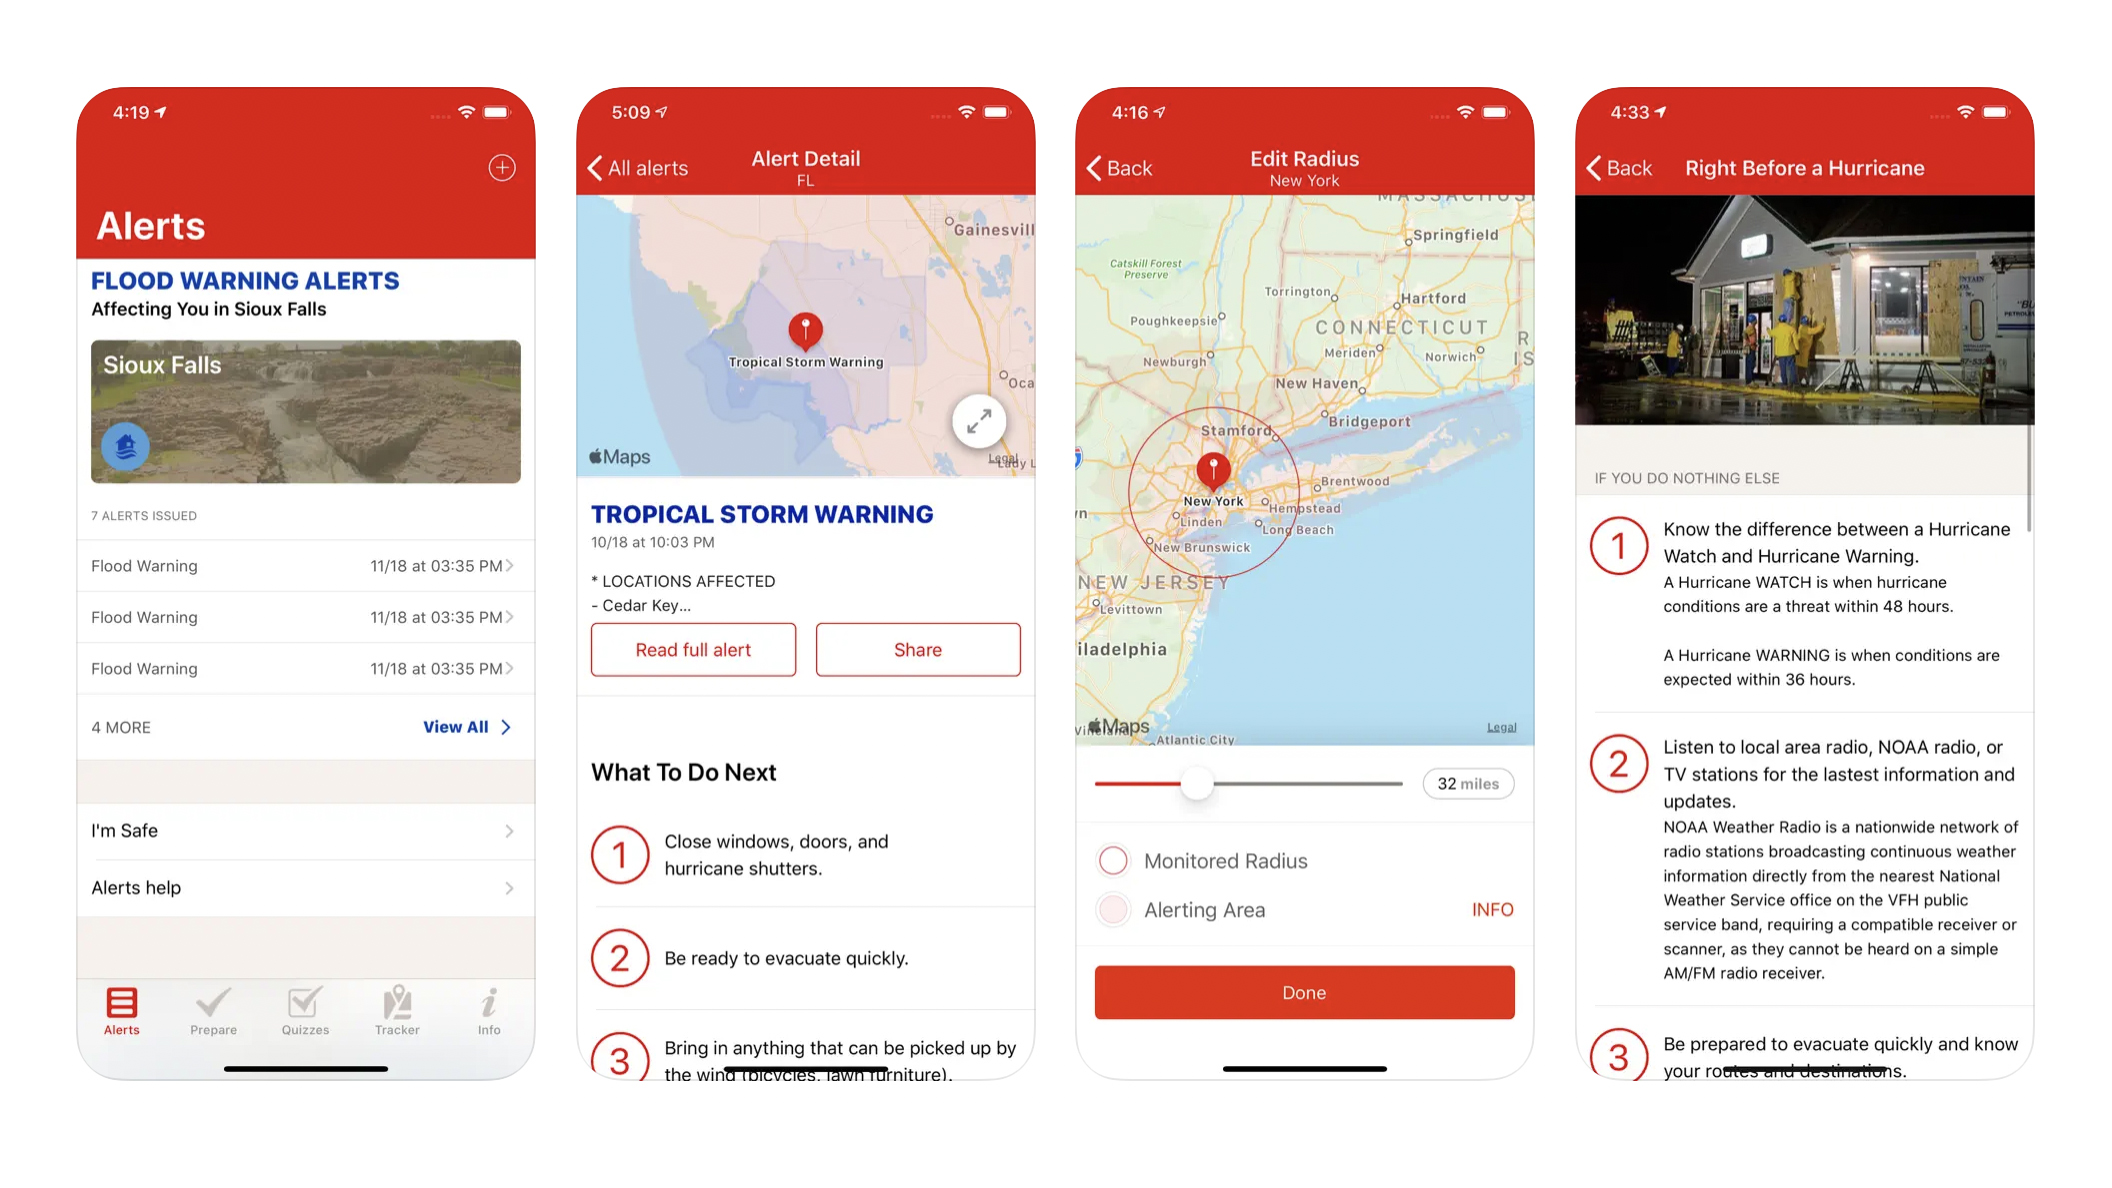 Screenshots of the Hurricane by American Red Cross App